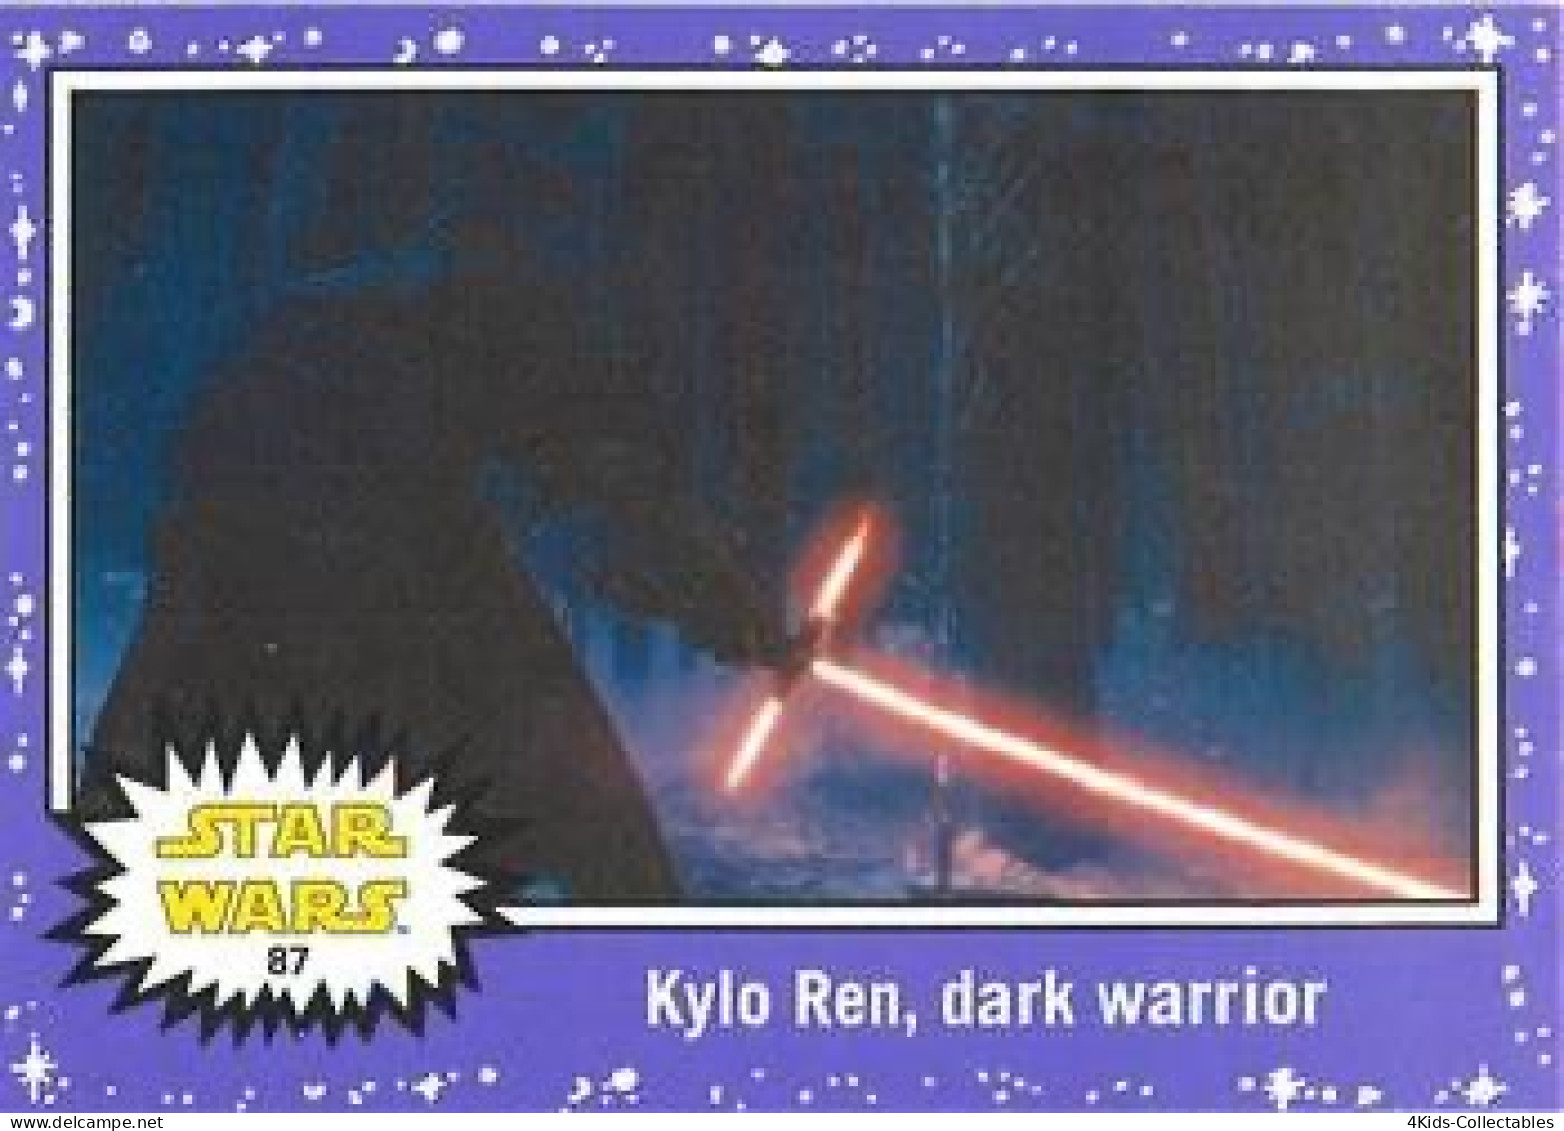 2015 Topps STAR WARS Journey To The Force Awakens "PURPLE Starfield" Parallel #87 - Star Wars